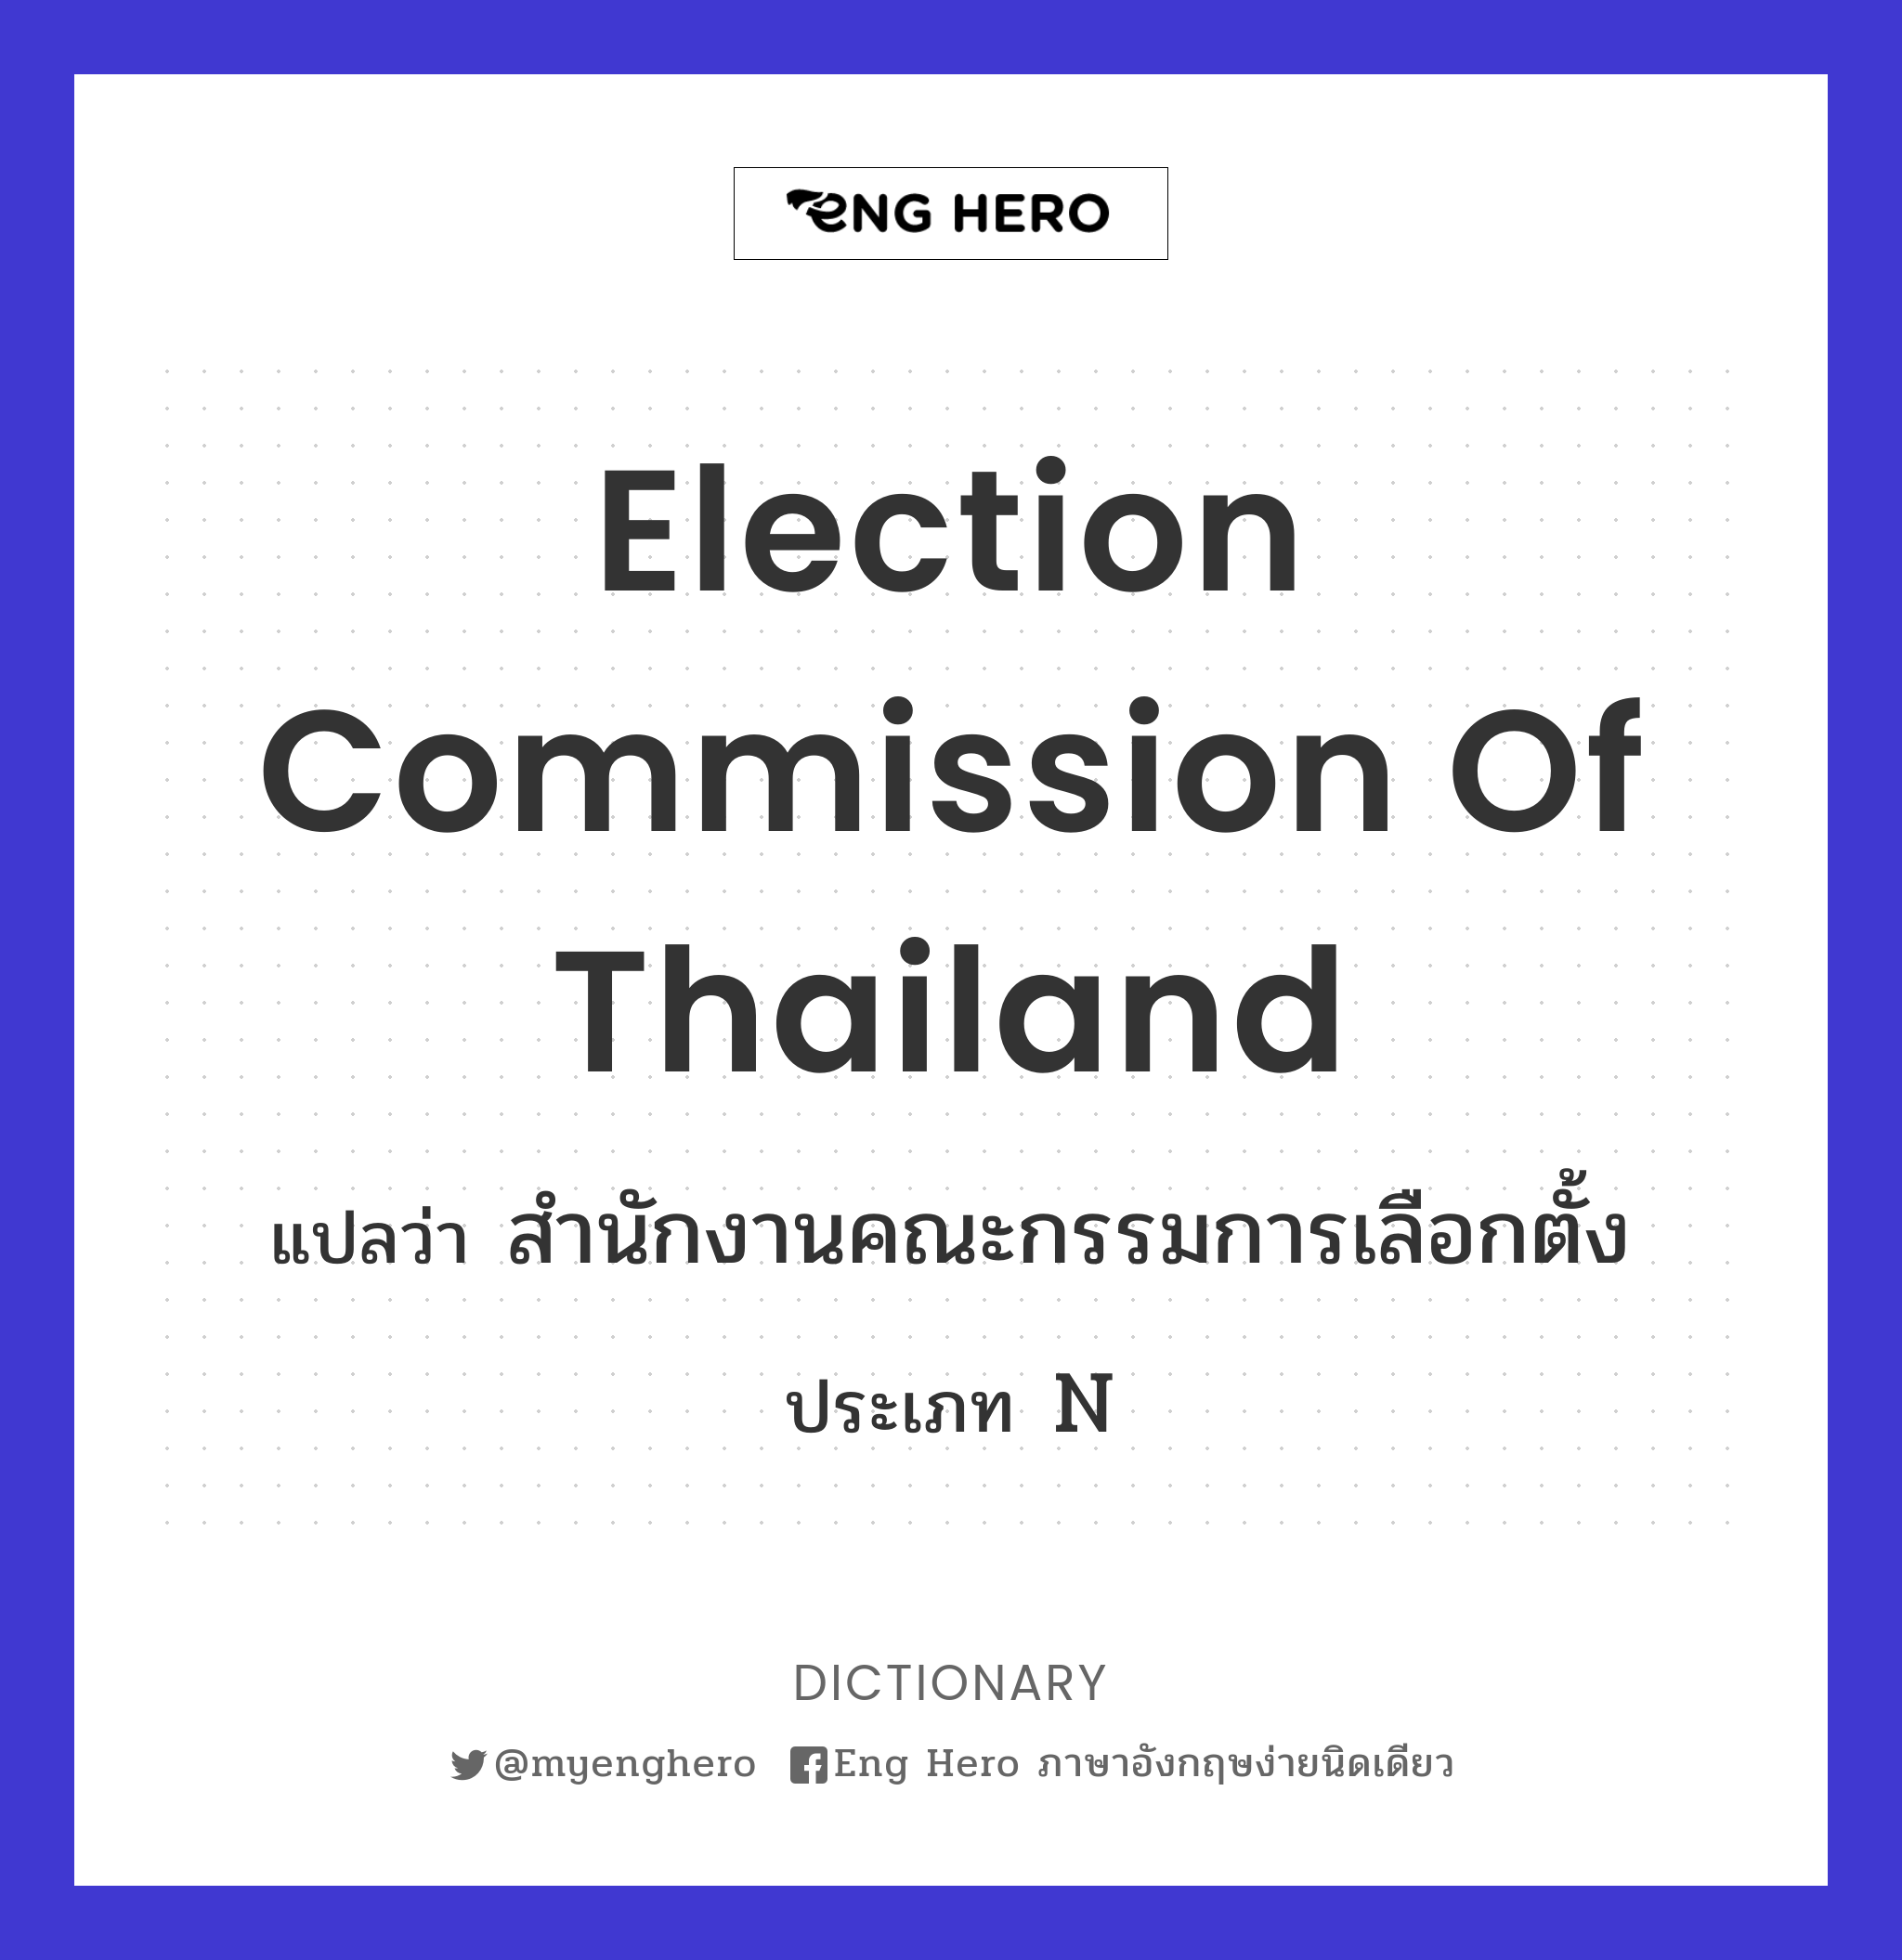 Election Commission of Thailand